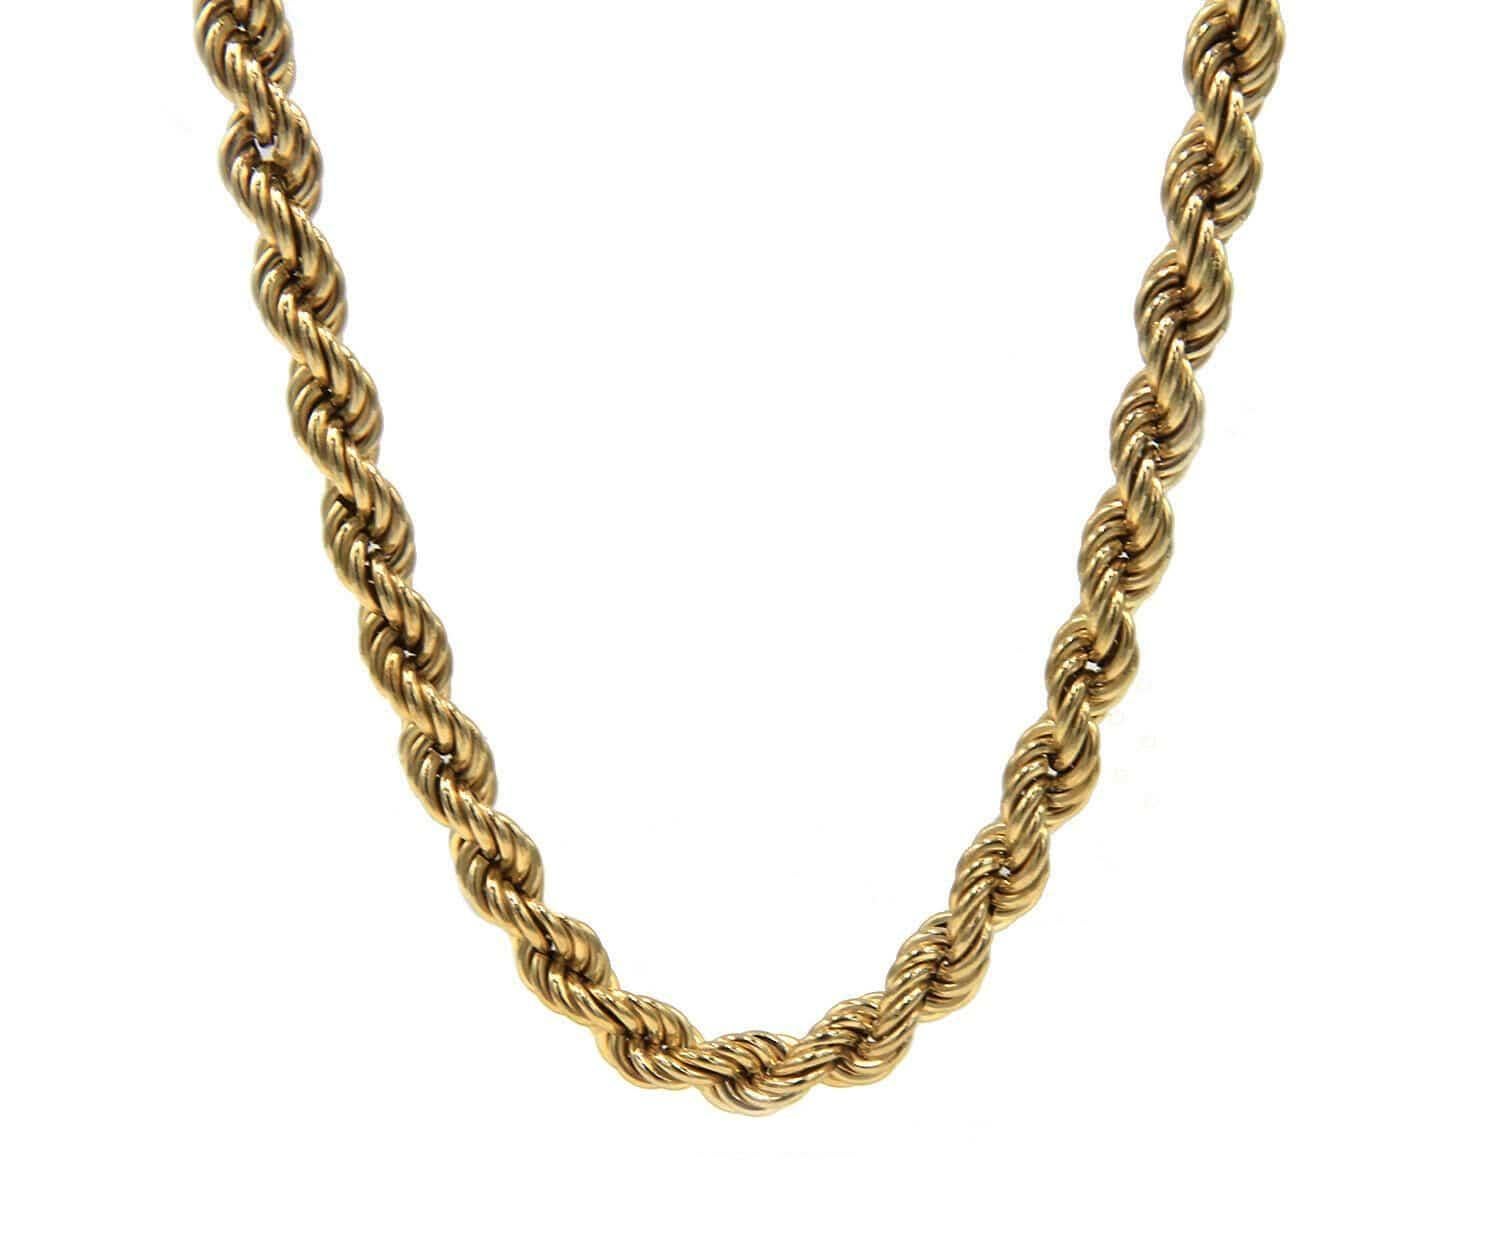 Women's Rope Chain Necklace in 14K Yellow Gold For Sale